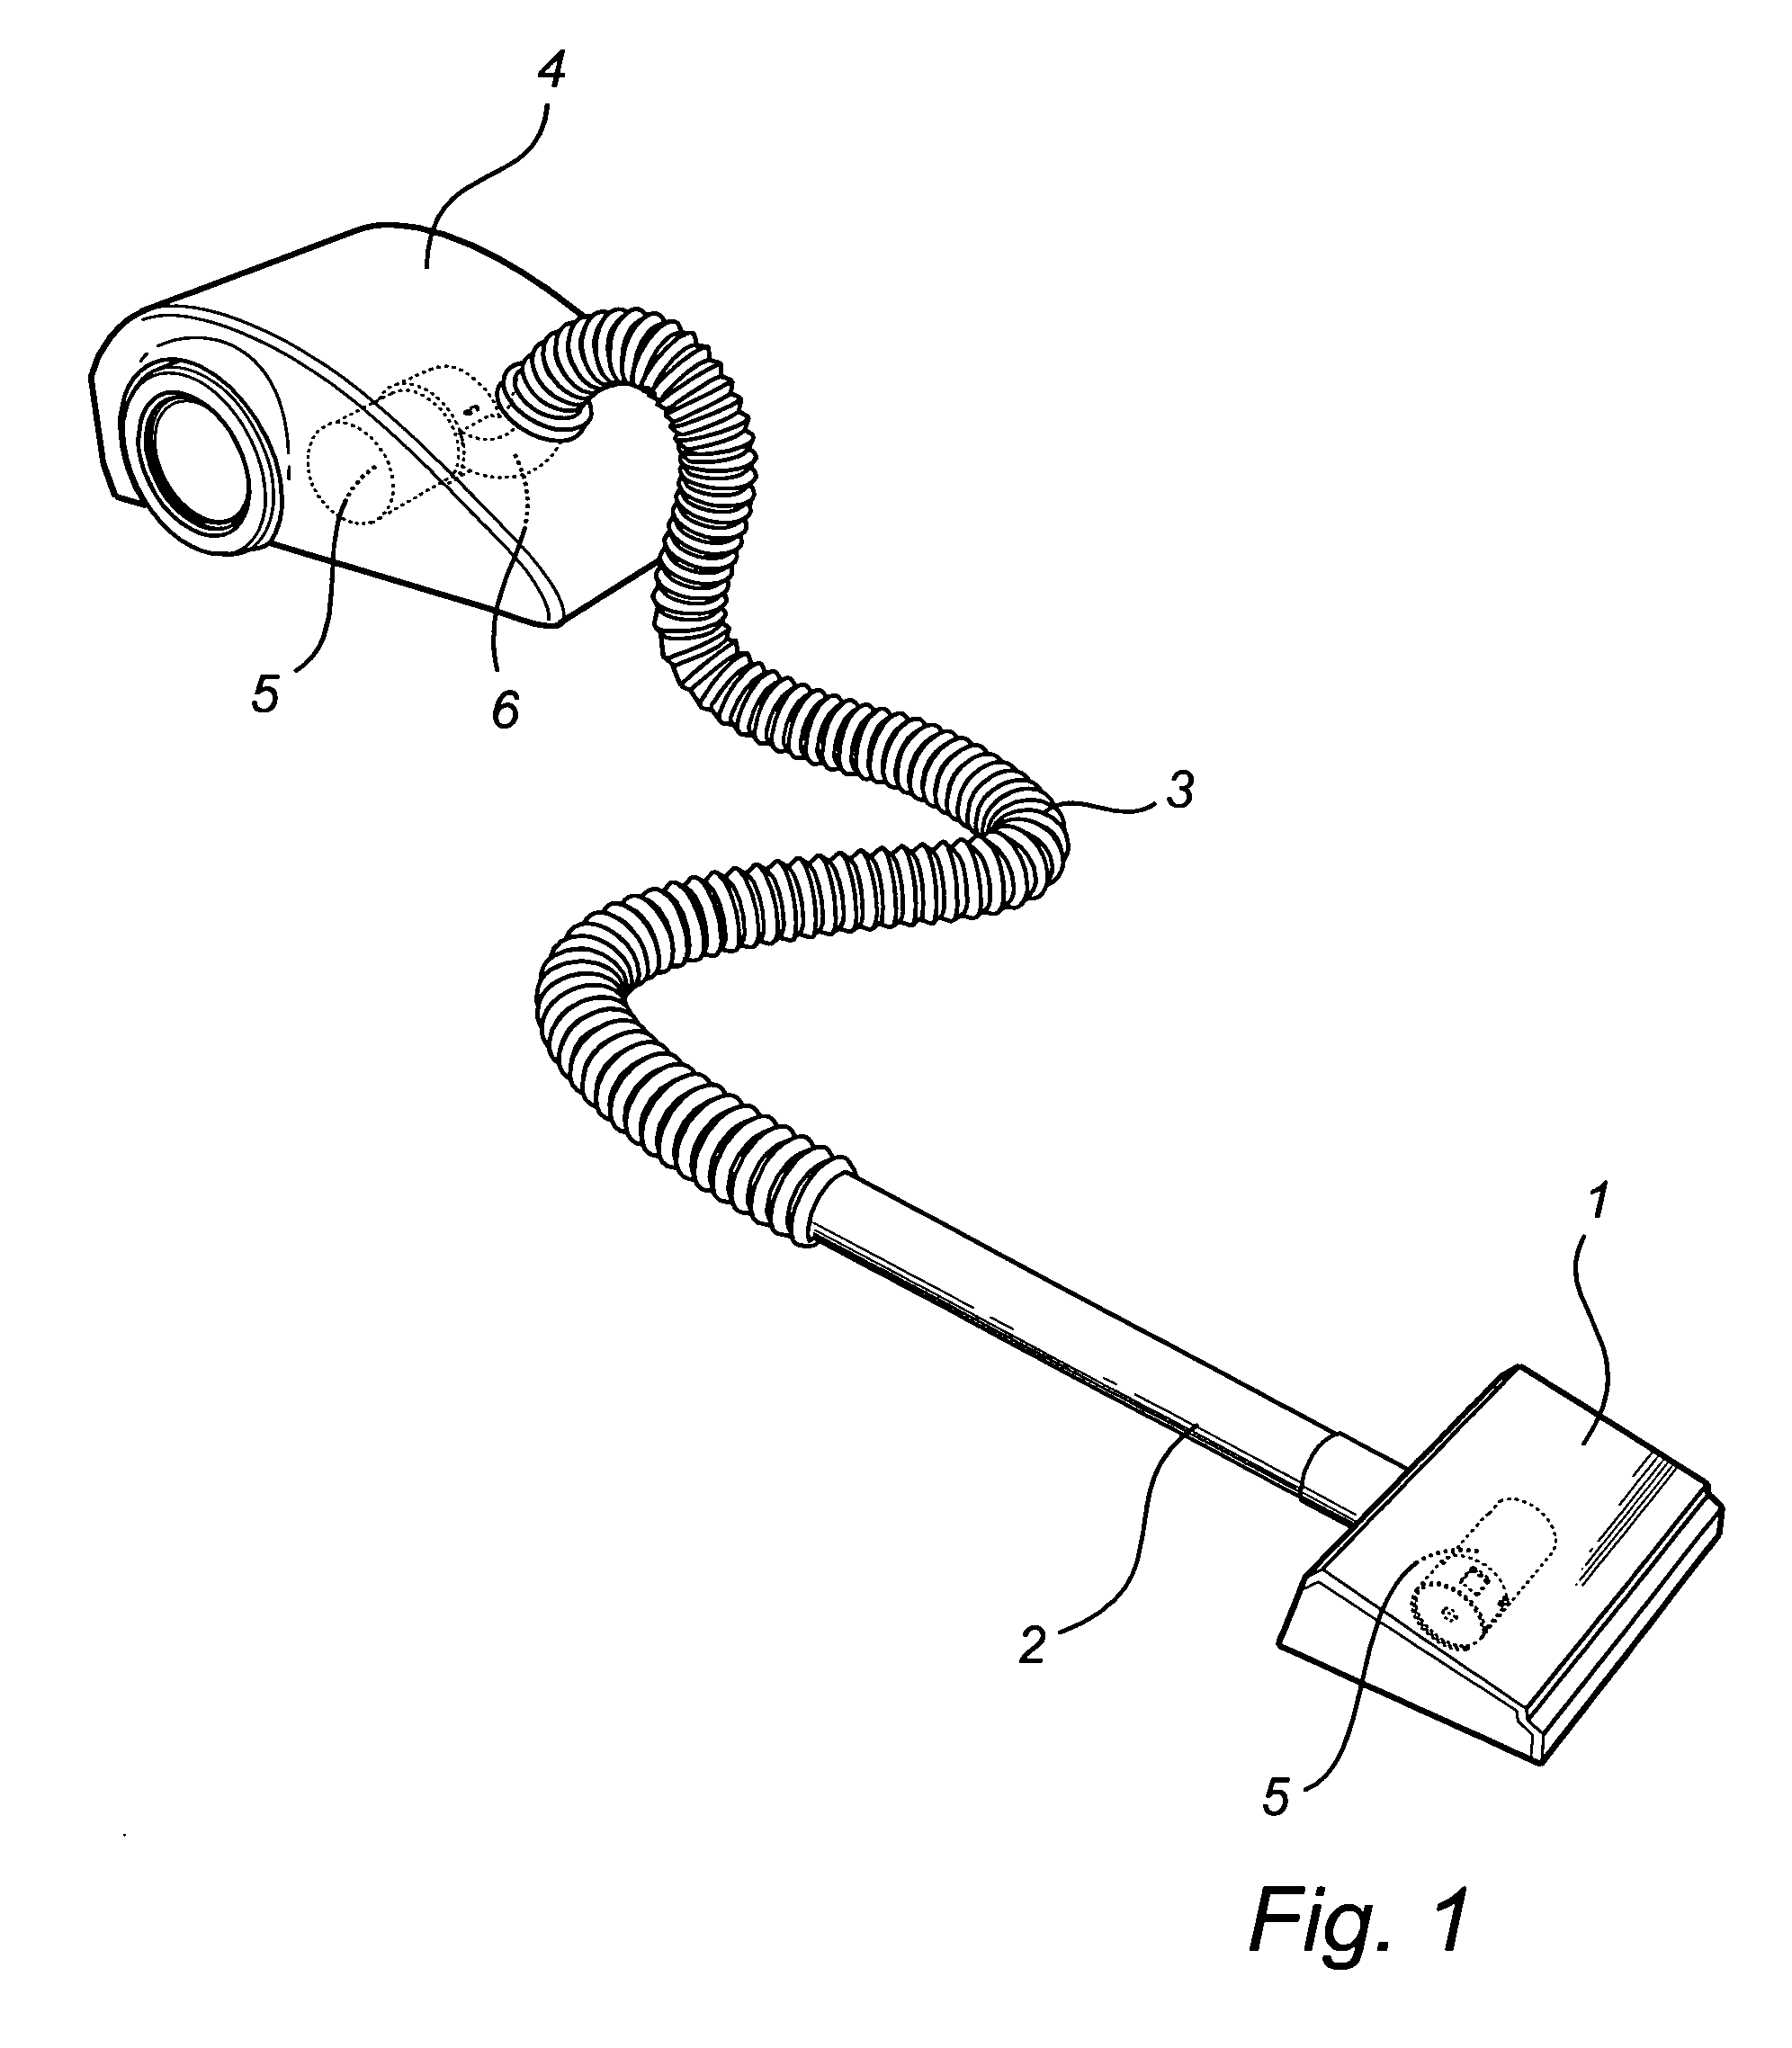 Cyclone-like separator for a vacuum cleaner